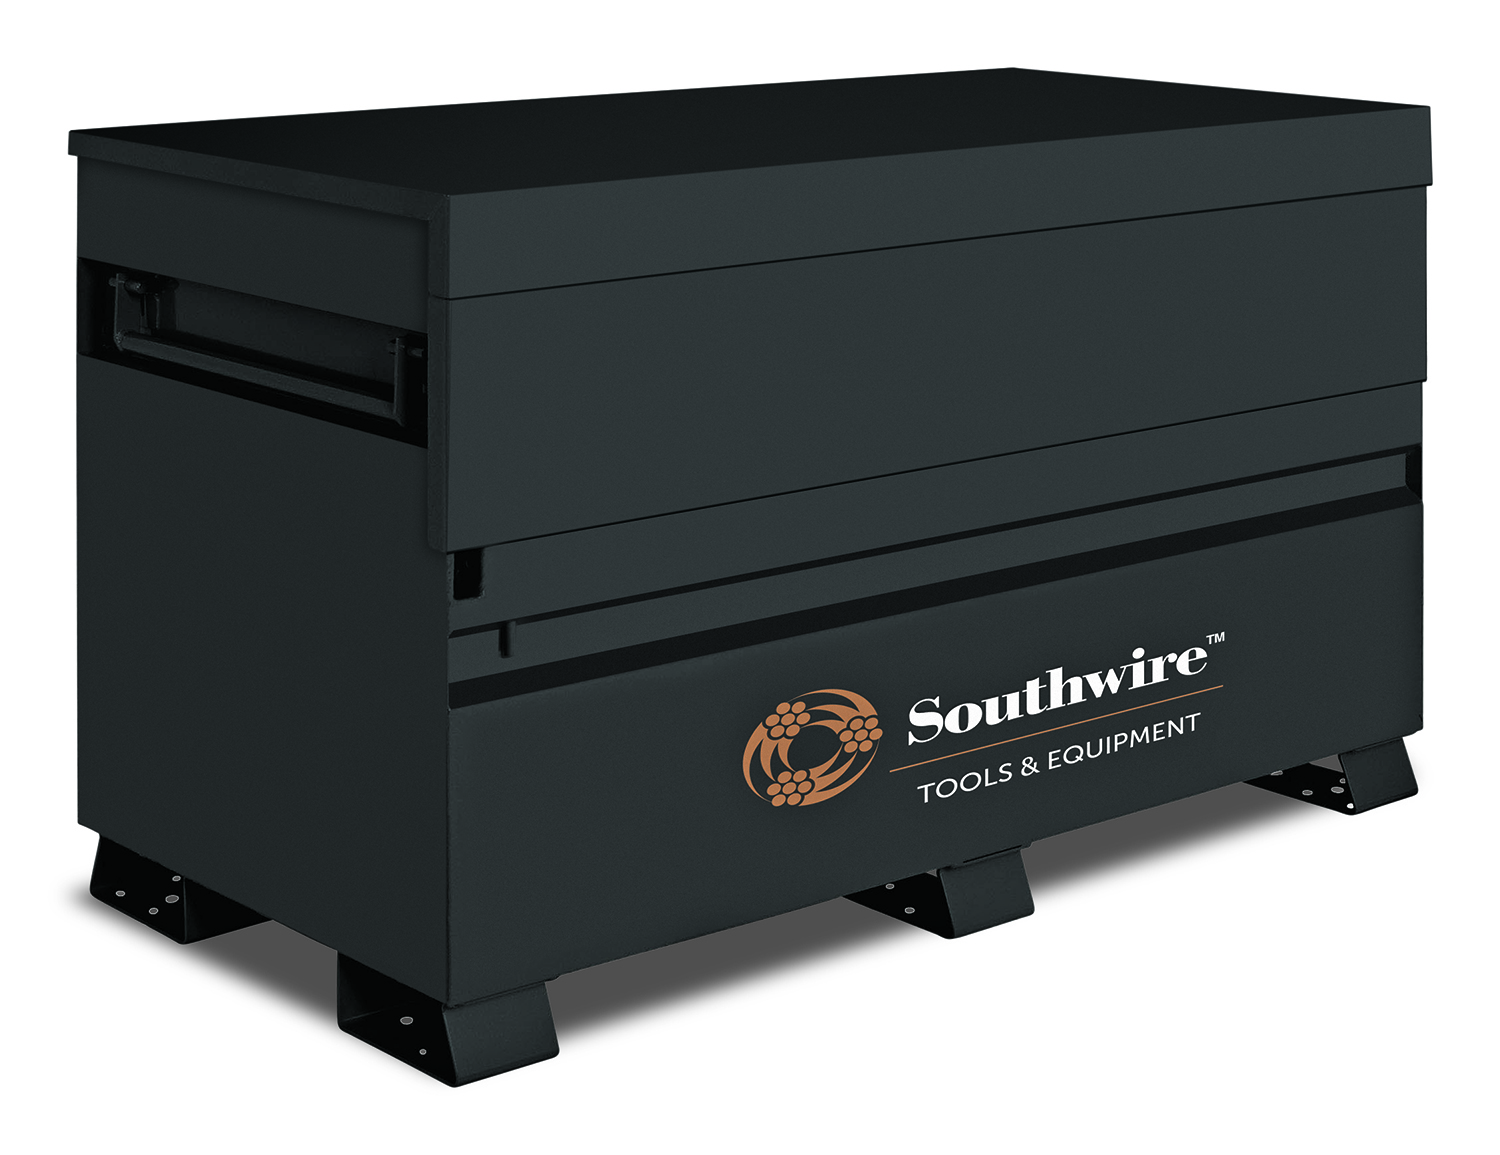 Piano boxes offer storage for both small and large tools alike. Organization is at a premium while securing your tools and equipment on the jobsite. With the Southwire Piano Box there is no better way to control and secure your livelihood.